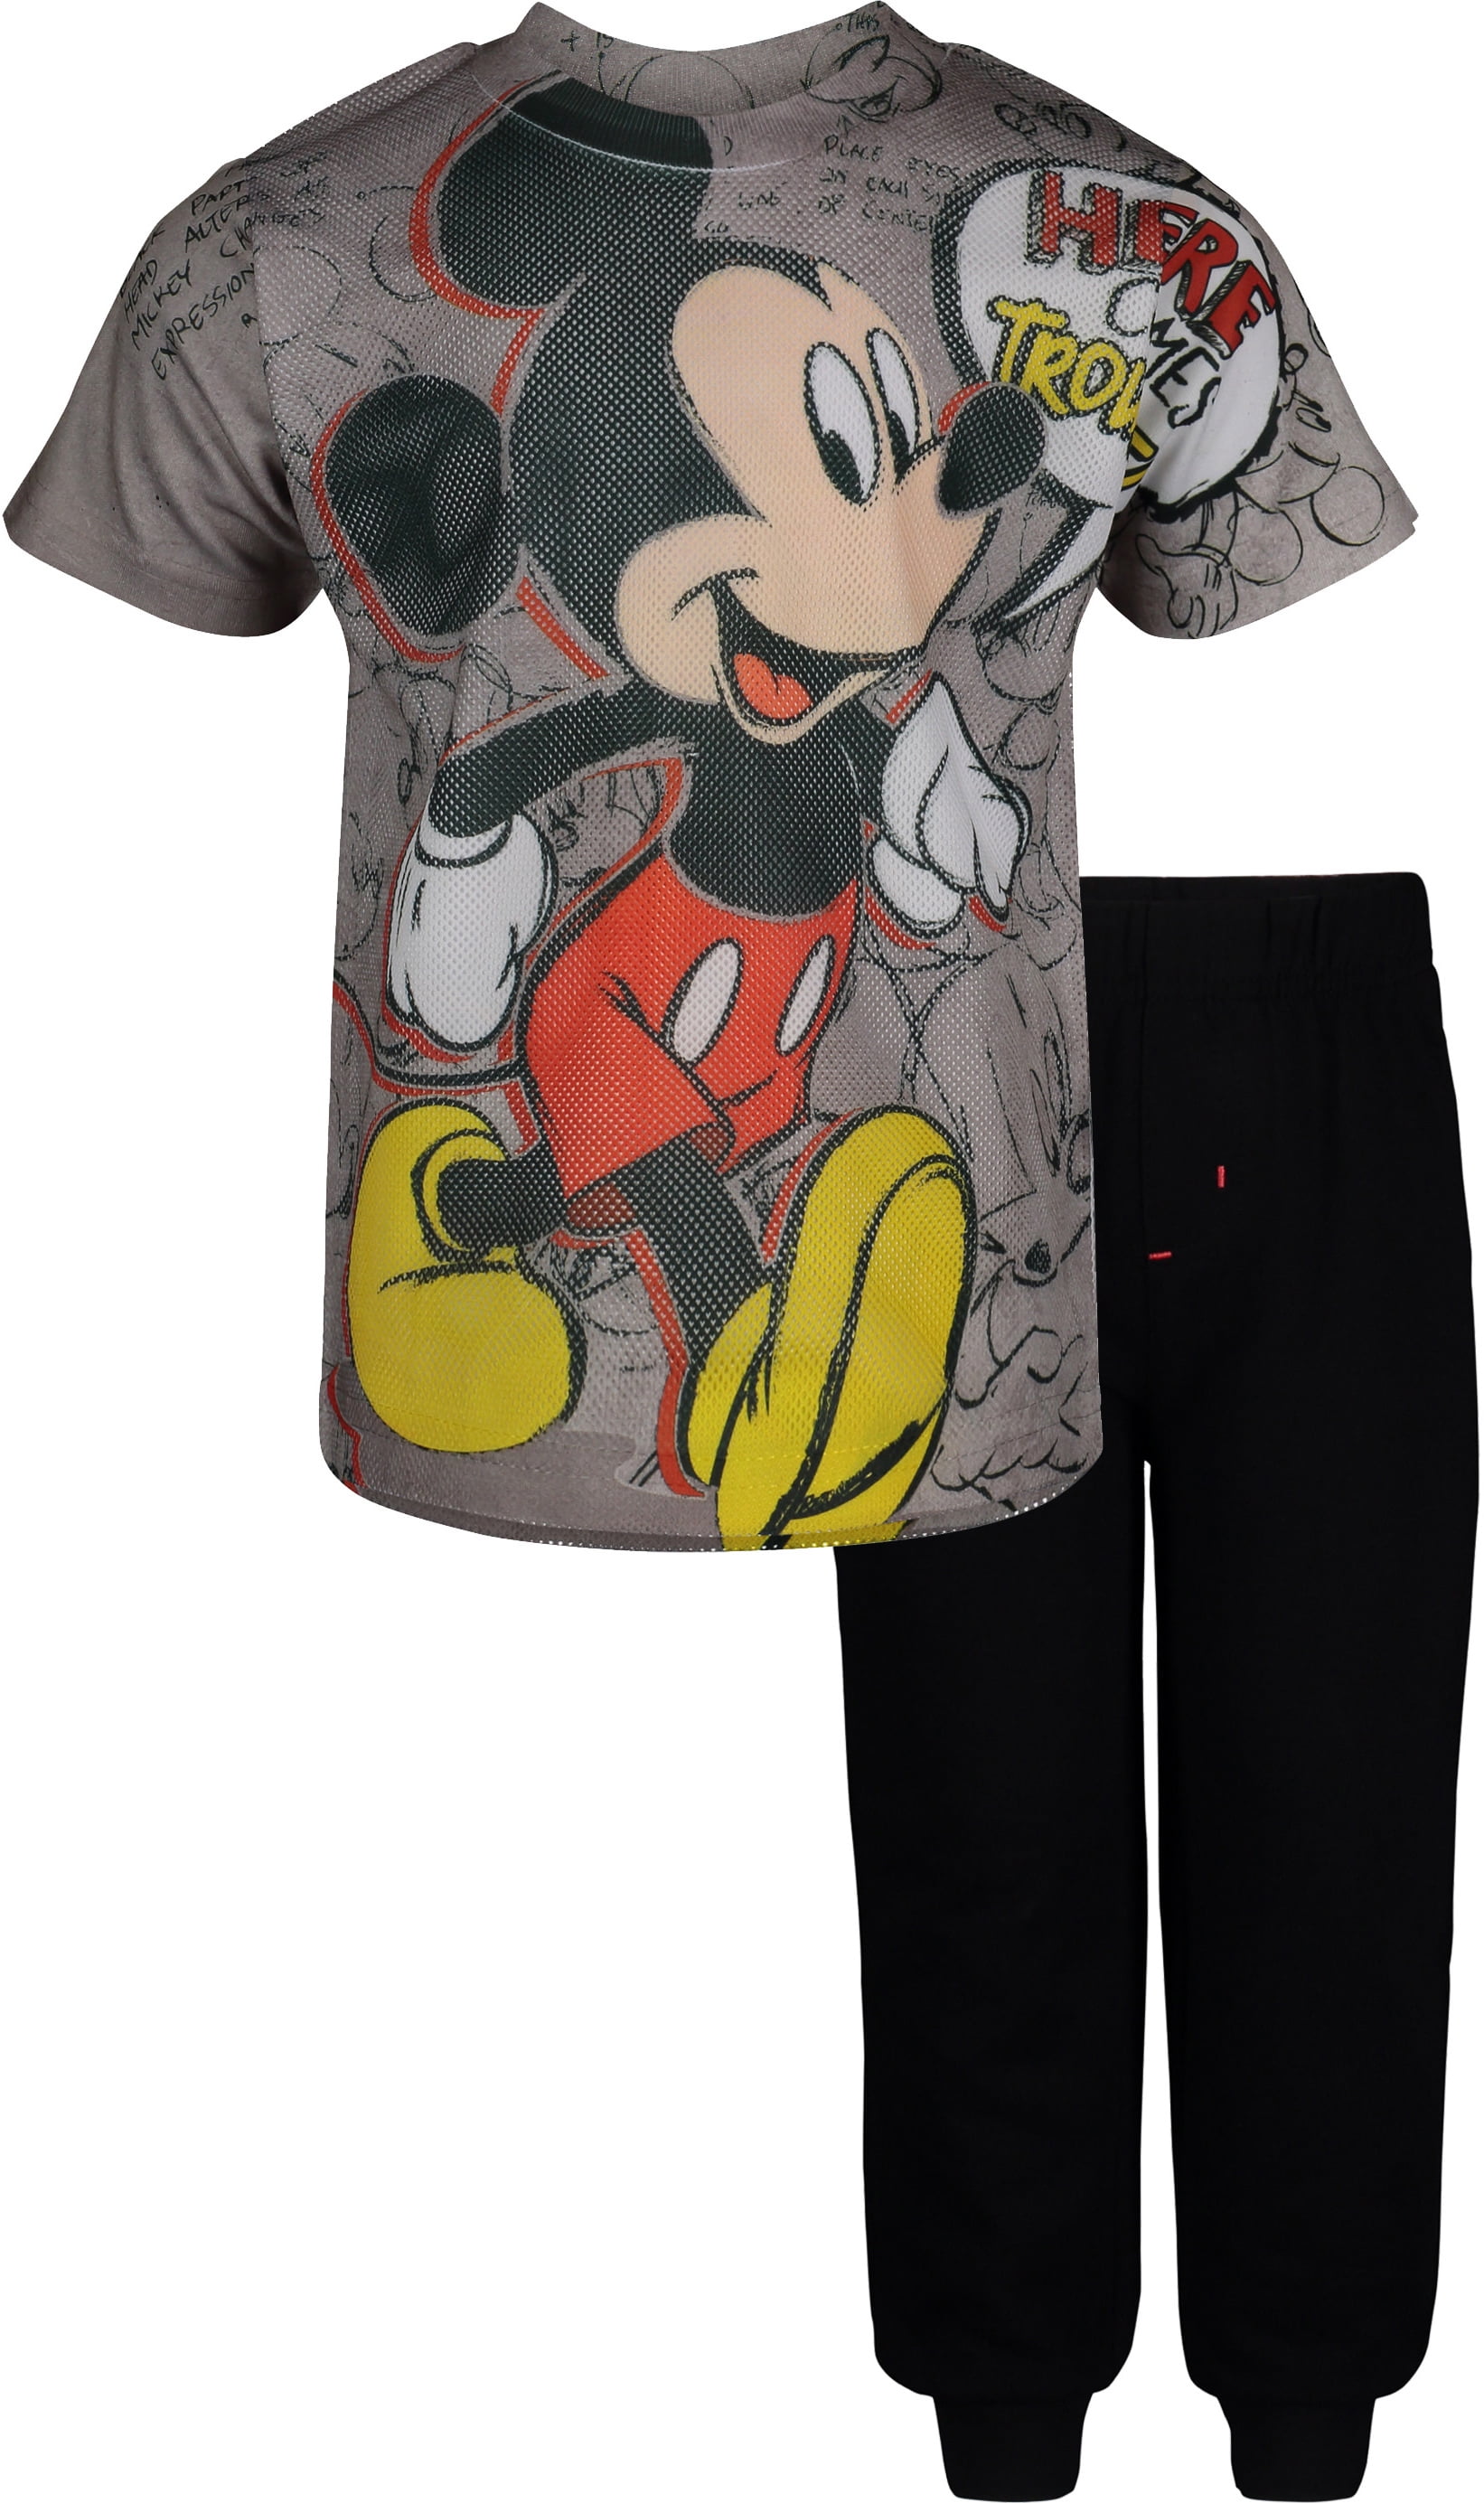 MickeyMinnie Shirt Sets With Back Designs